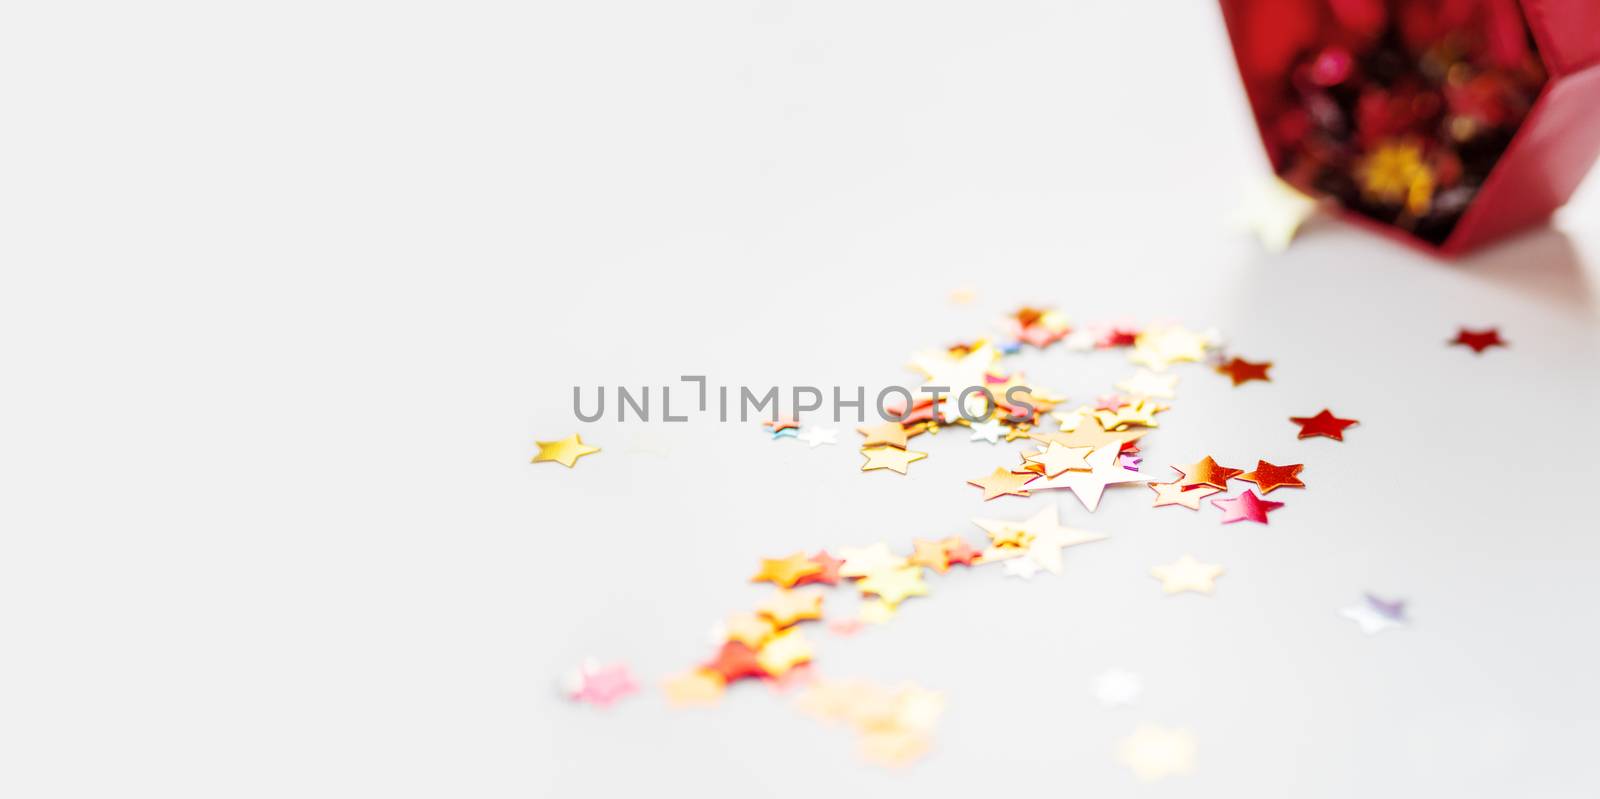 Banner with stars confetti which fallen from red sparkling box. Holiday decoration on white background.